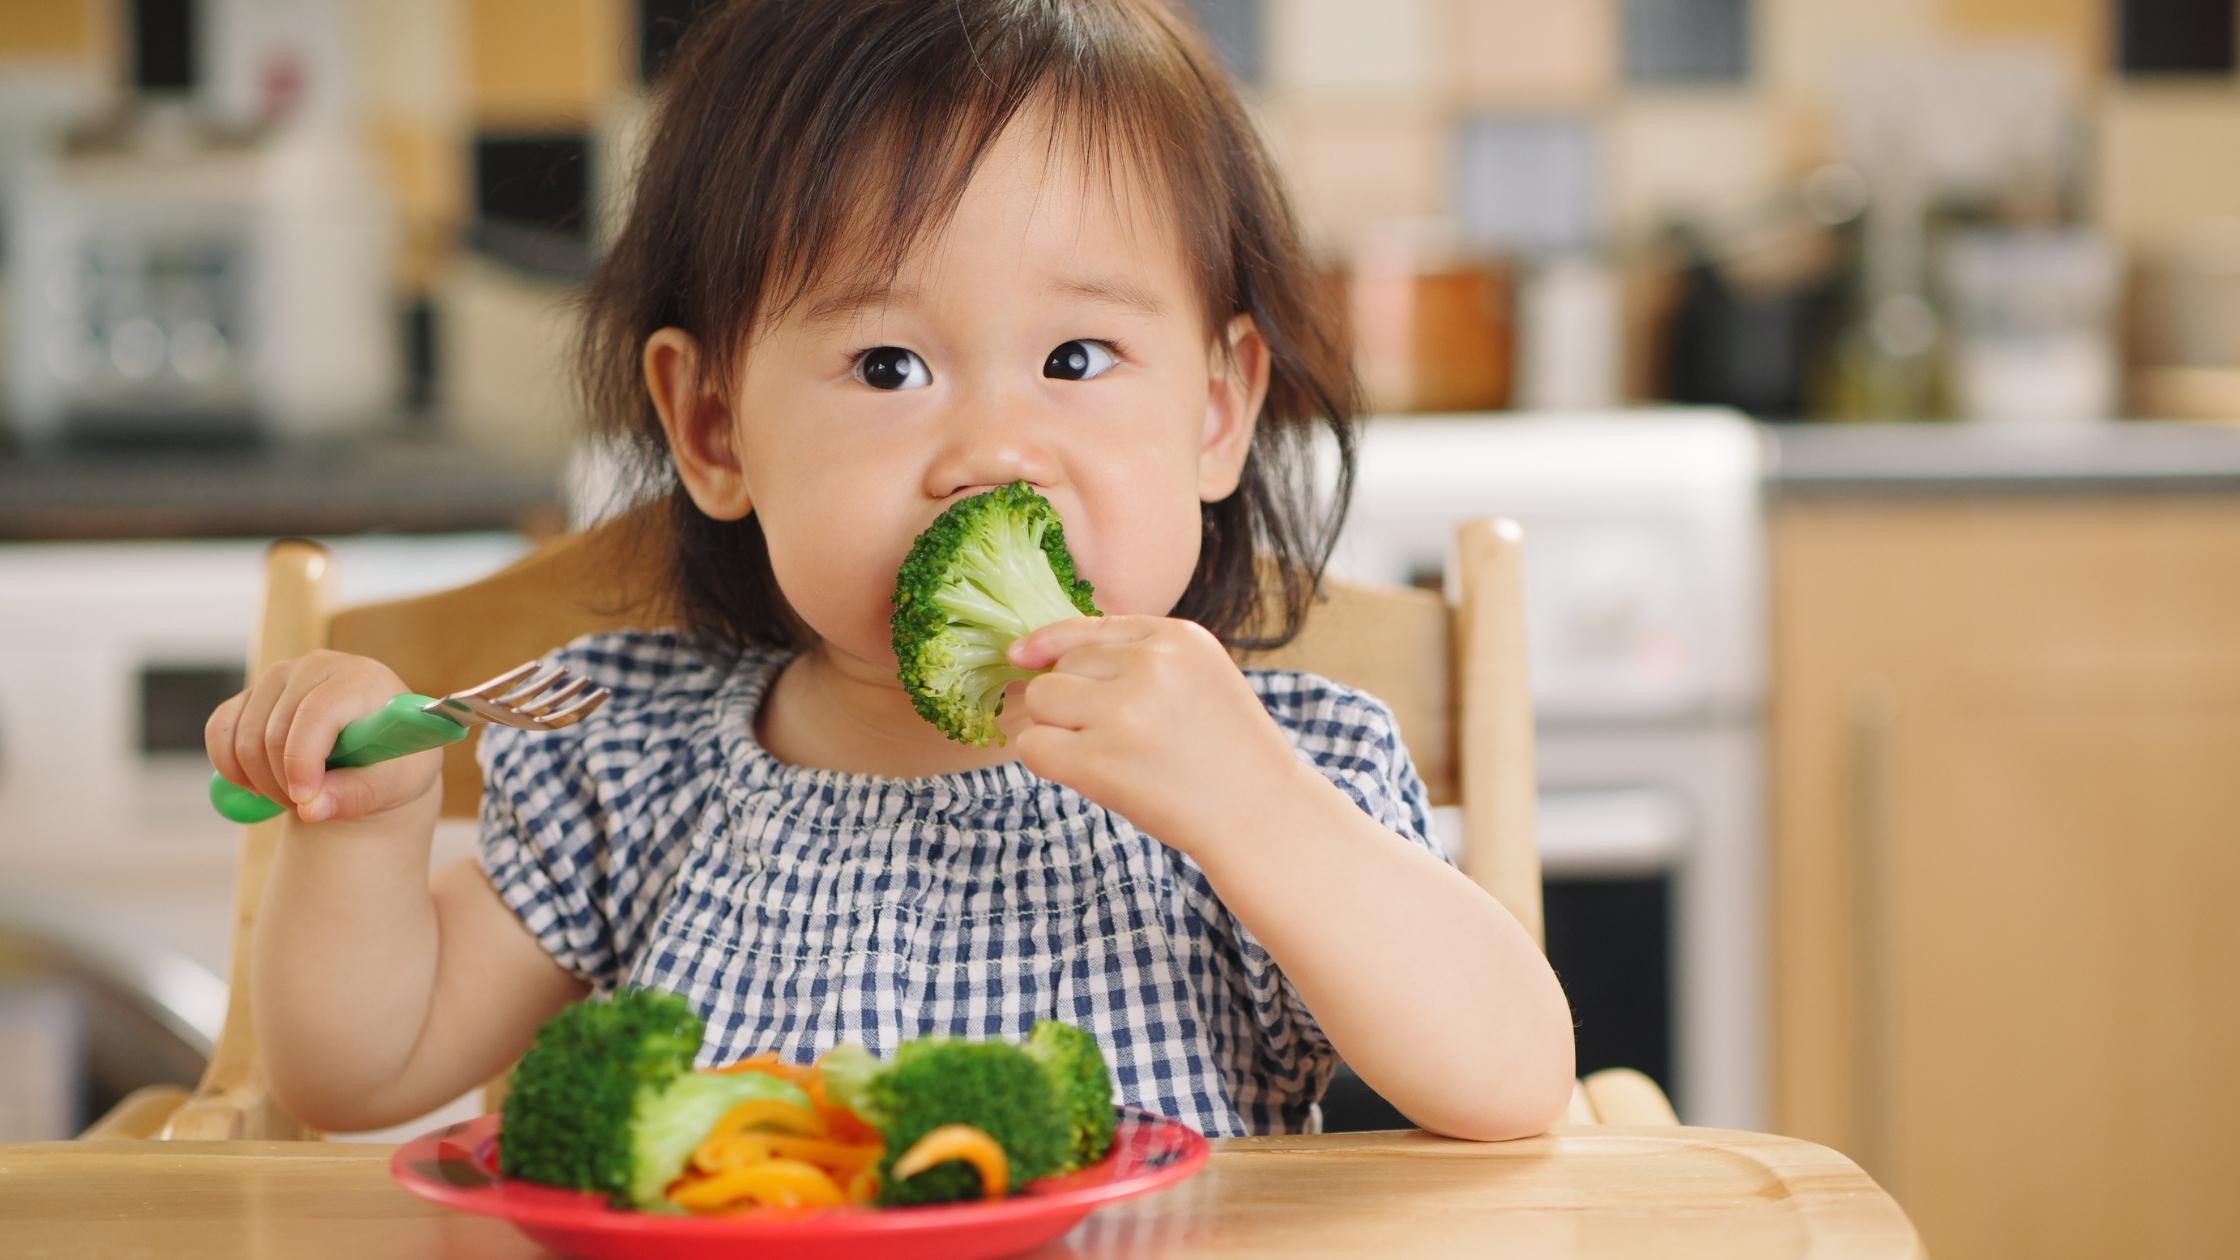 Healthy Foods Your Child May Enjoy